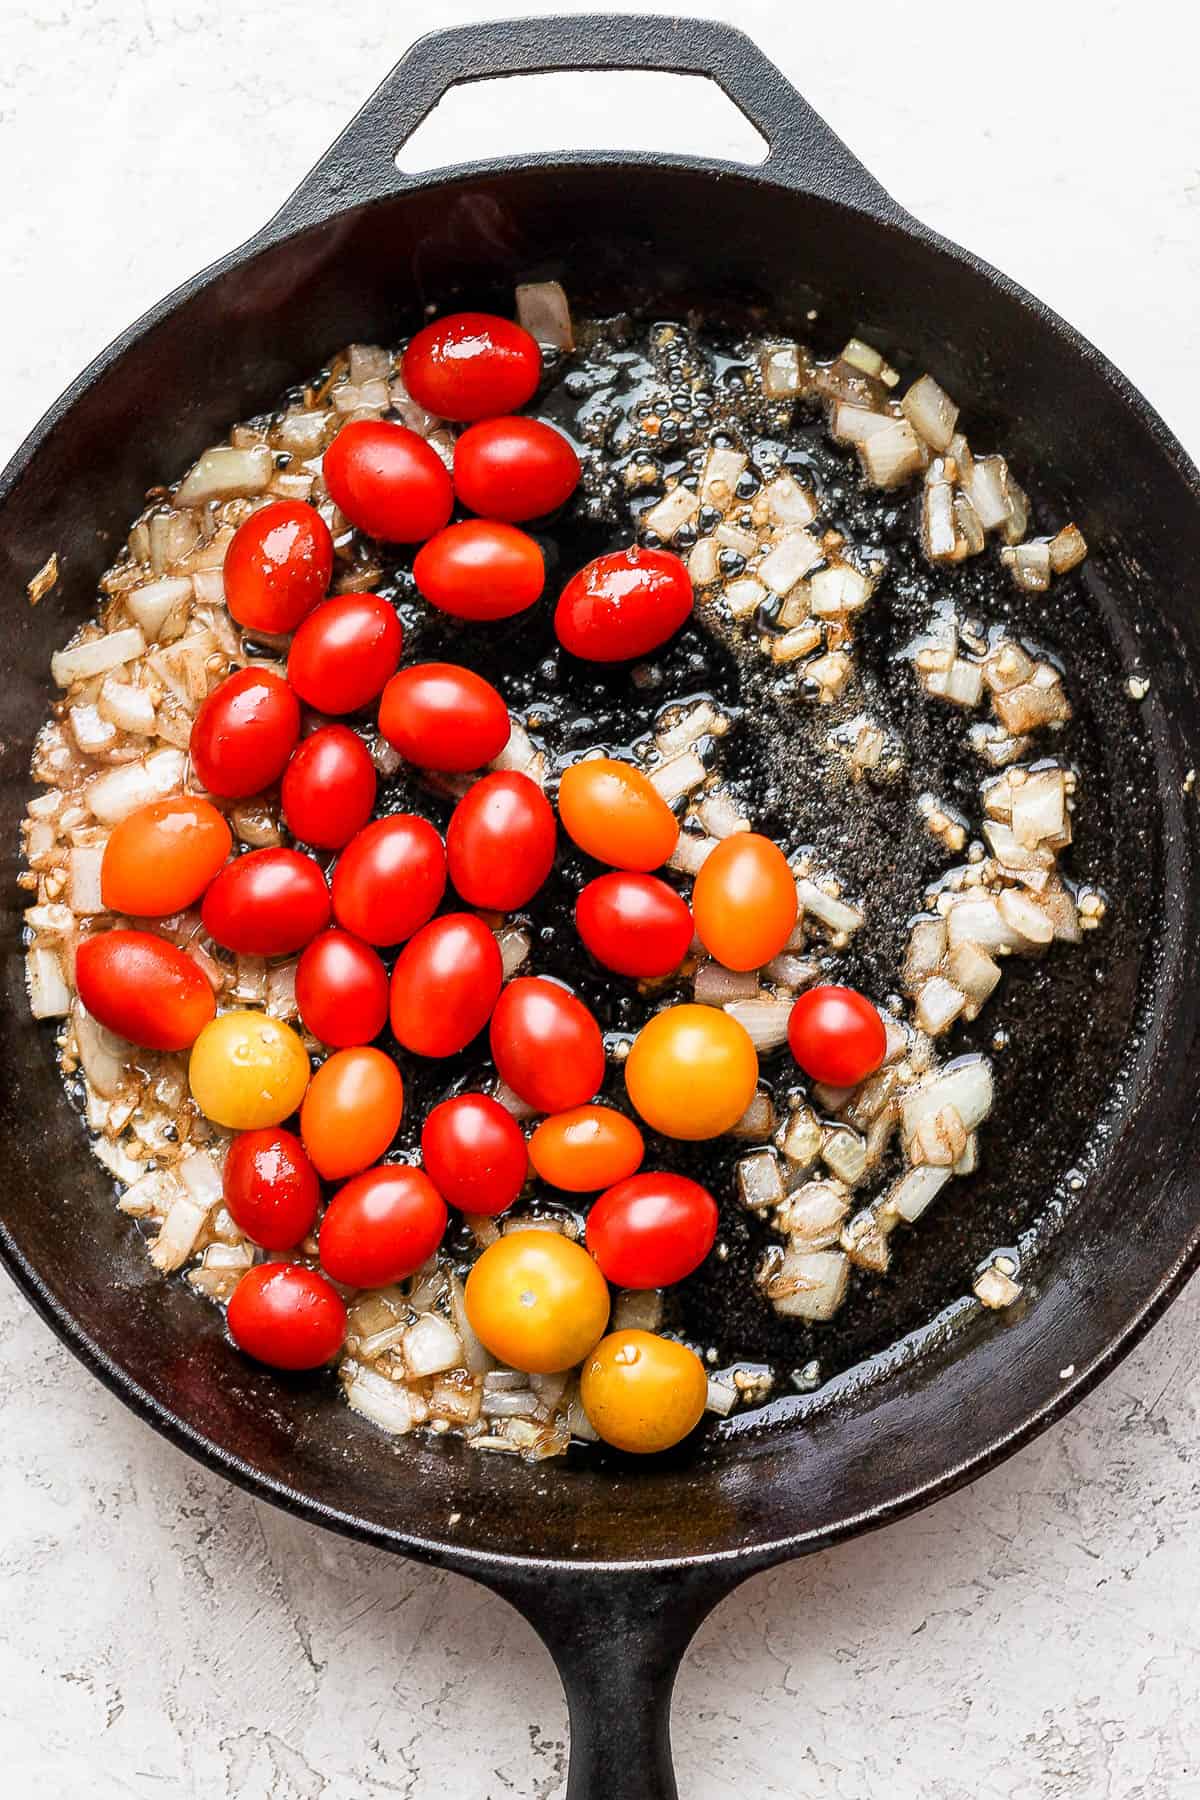 Cherry tomatoes added to the pan.